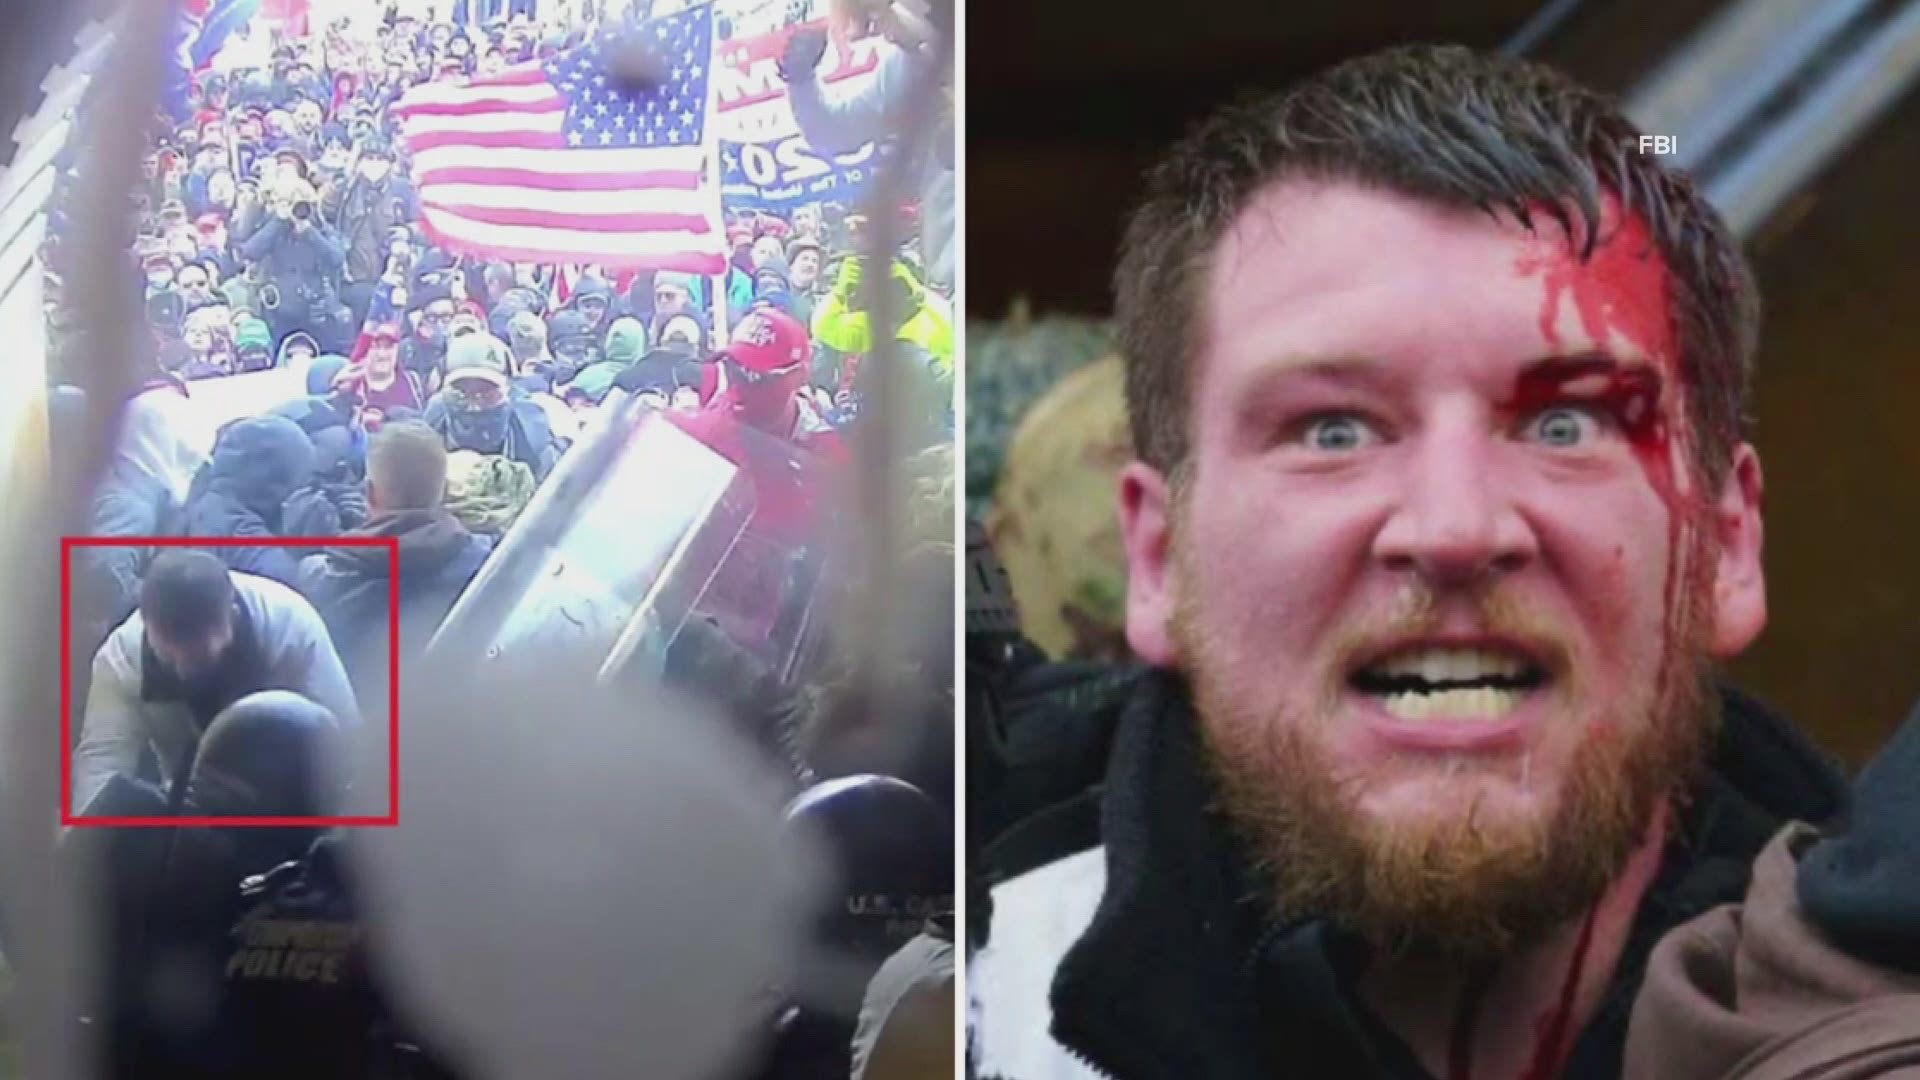 A detention hearing is set to take place at 1:00 p.m. on Thursday for Kyle Fitzsimons of Lebanon, Maine who is facing charges for his involvement in the Capitol Riot